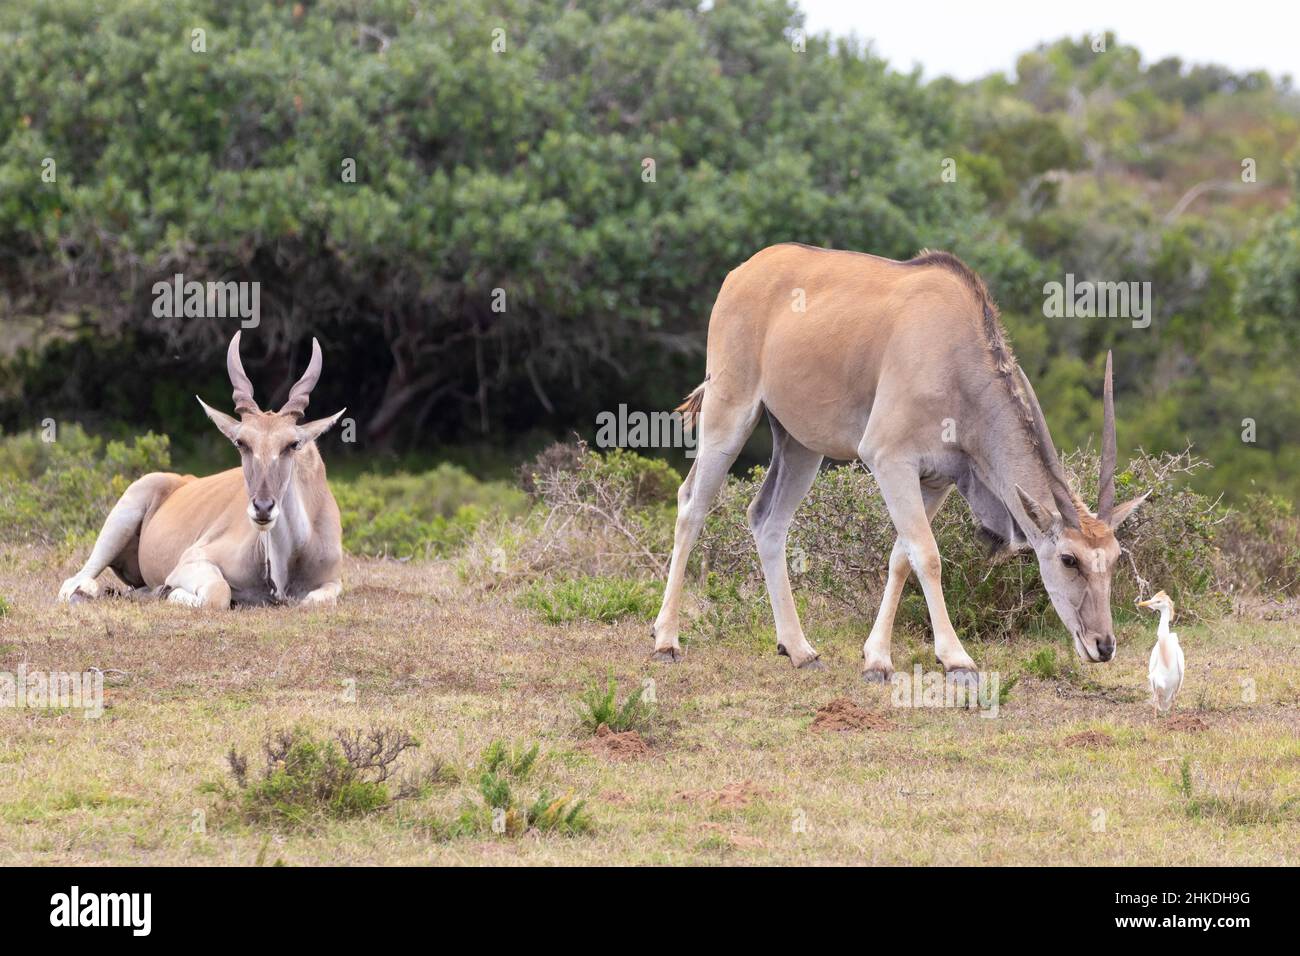 Common / Southern Eland (Taurotragus oryx) at De Hop Nature Reserve, Western Cape, South Africa Stock Photo